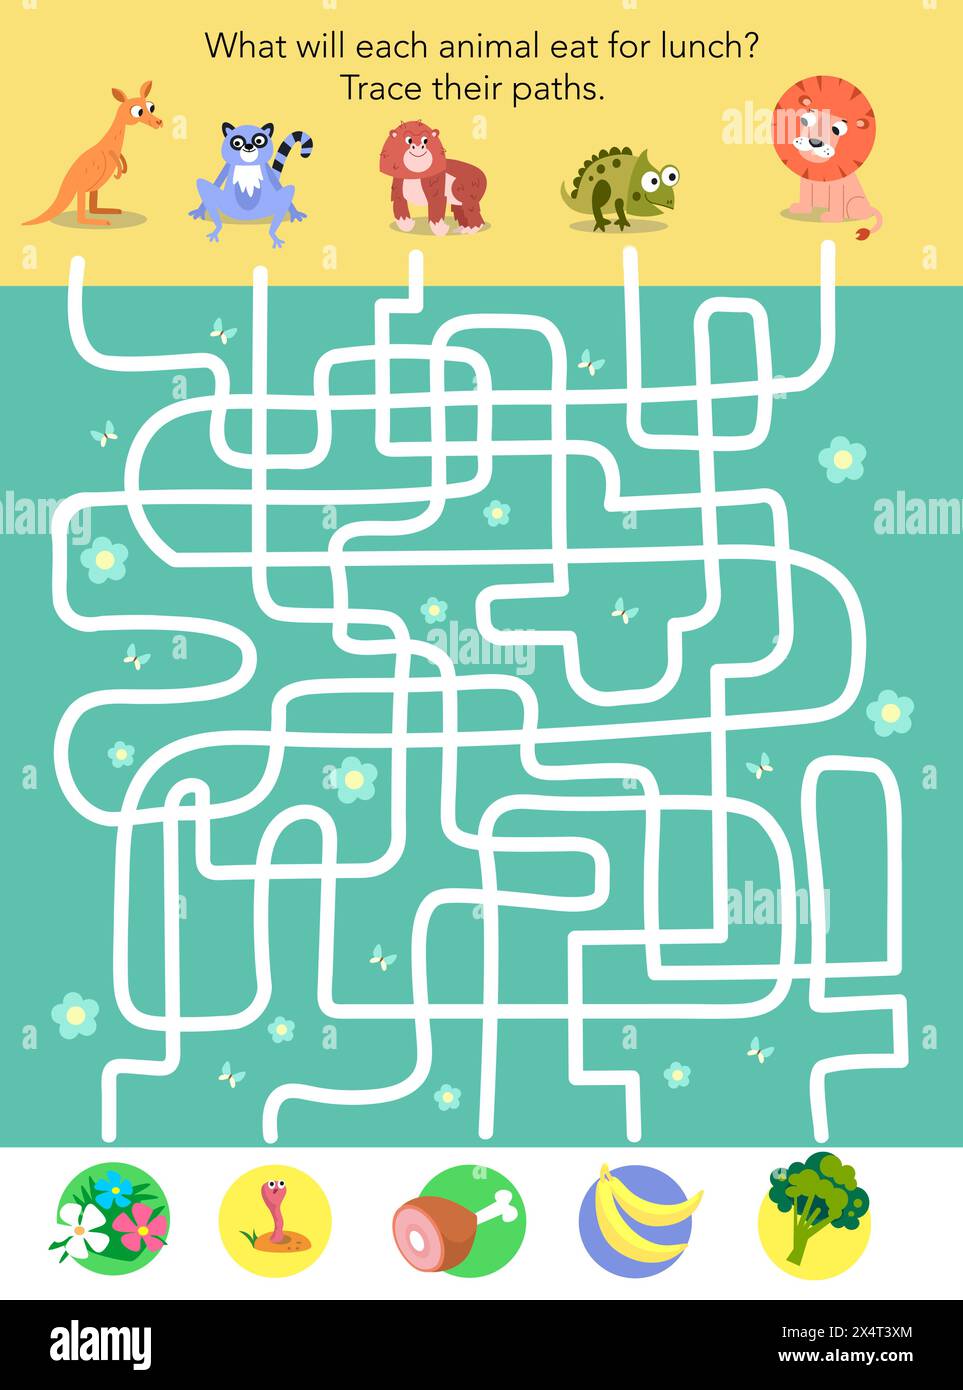 Maze game, activity for children. Vector illustration. African Australian animals and lunch. Tracing of paths. Cartoon cute characters.  Stock Vector